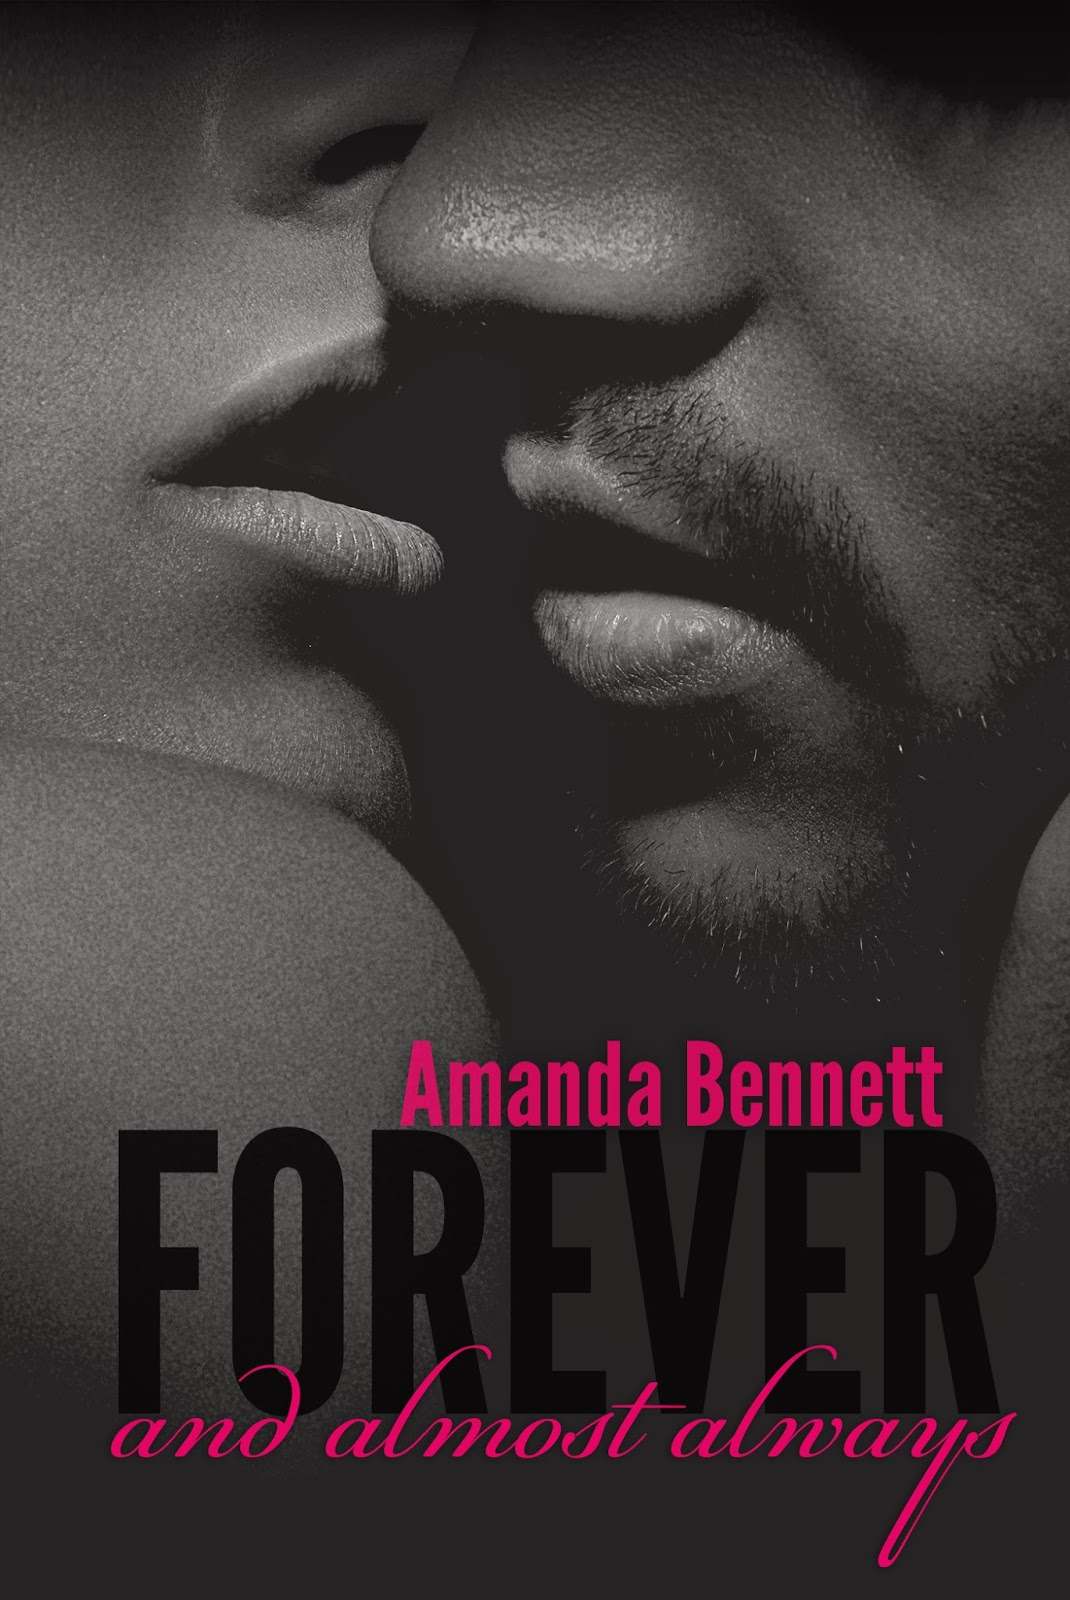 Romance fiction. Bennet Sings for lovers. Almost always.